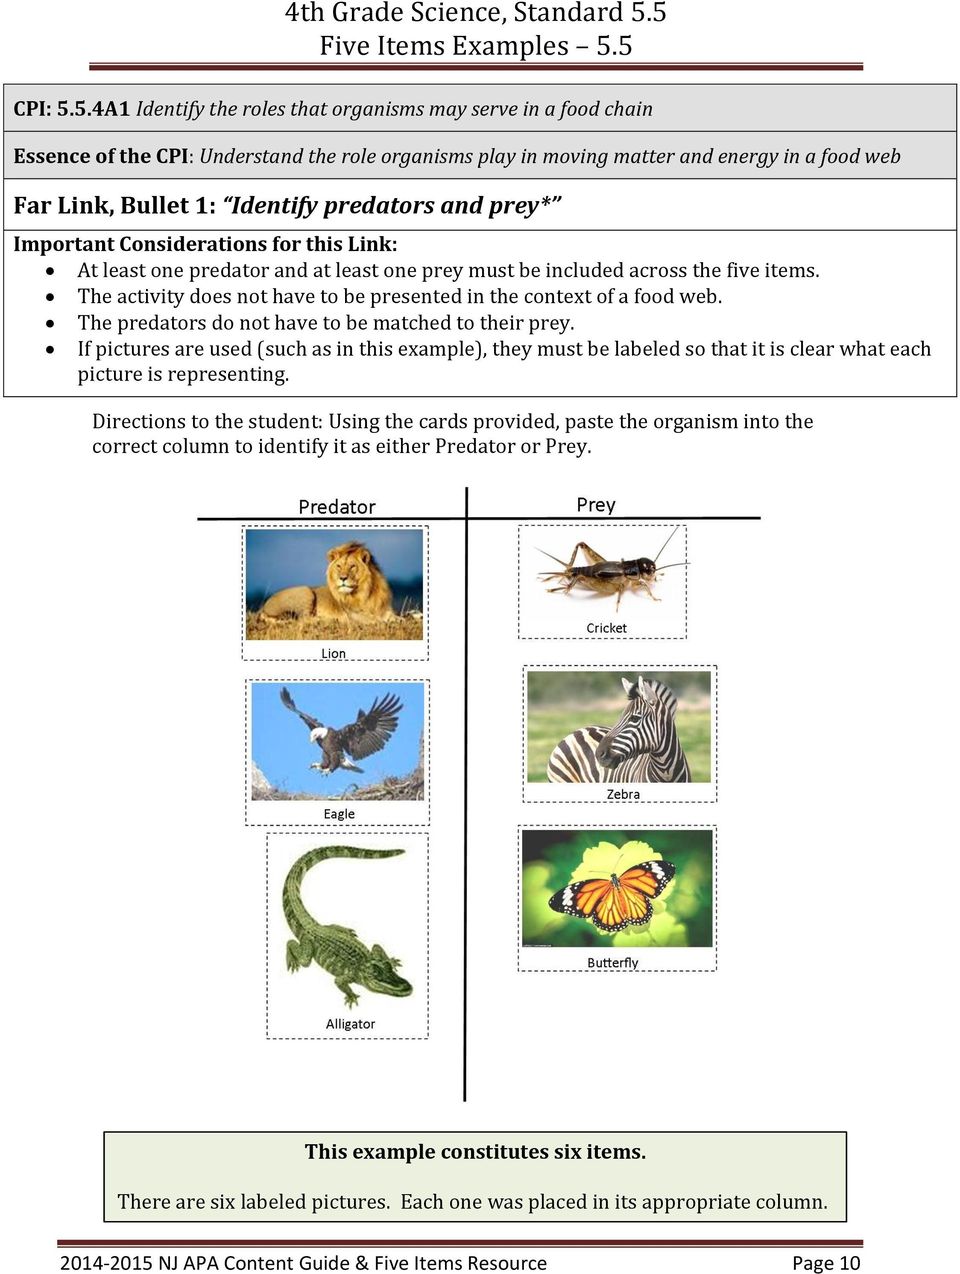 predators and prey* Important Considerations for this Link: At least one predator and at least one prey must be included across the five items.